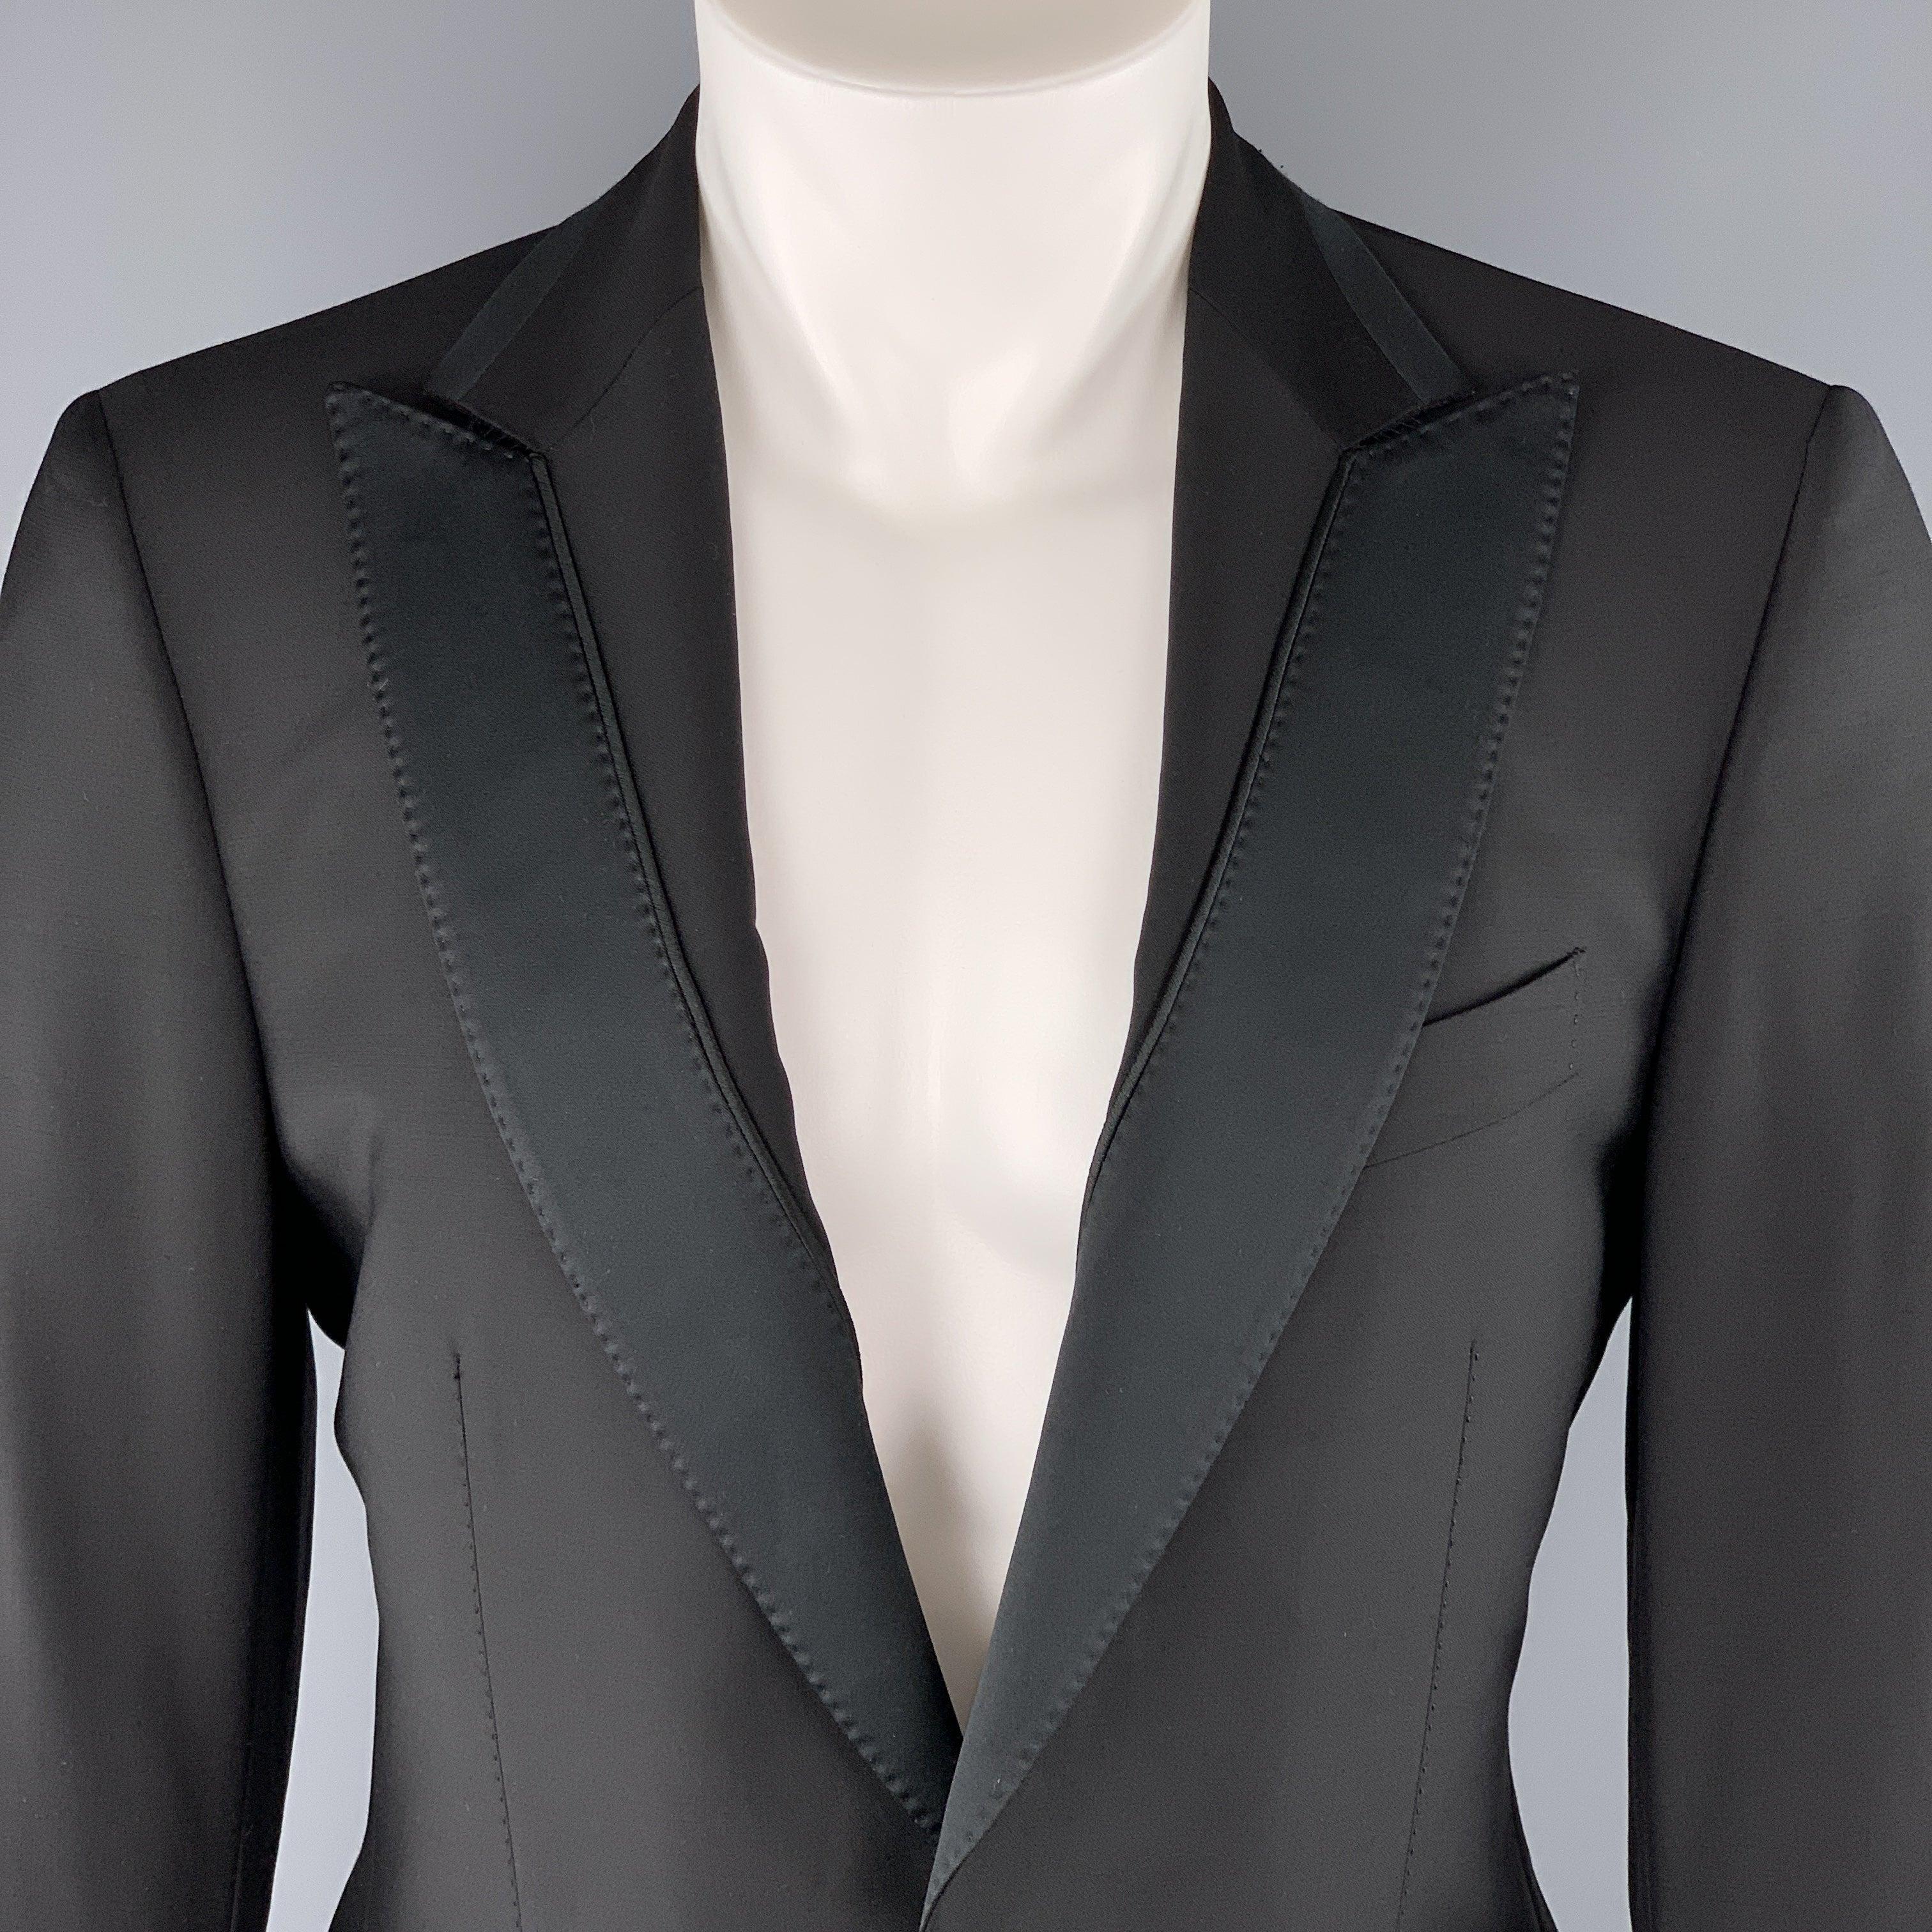 SALVATORE FERRAGAMO
sport coat comes in black wool with a satin detailed peak lapel, single breasted, one button front, and satin piping. Made in Italy.Excellent Pre-Owned Condition. 

Marked:   IT 50 

Measurements: 
 
Shoulder: 17.5 inches